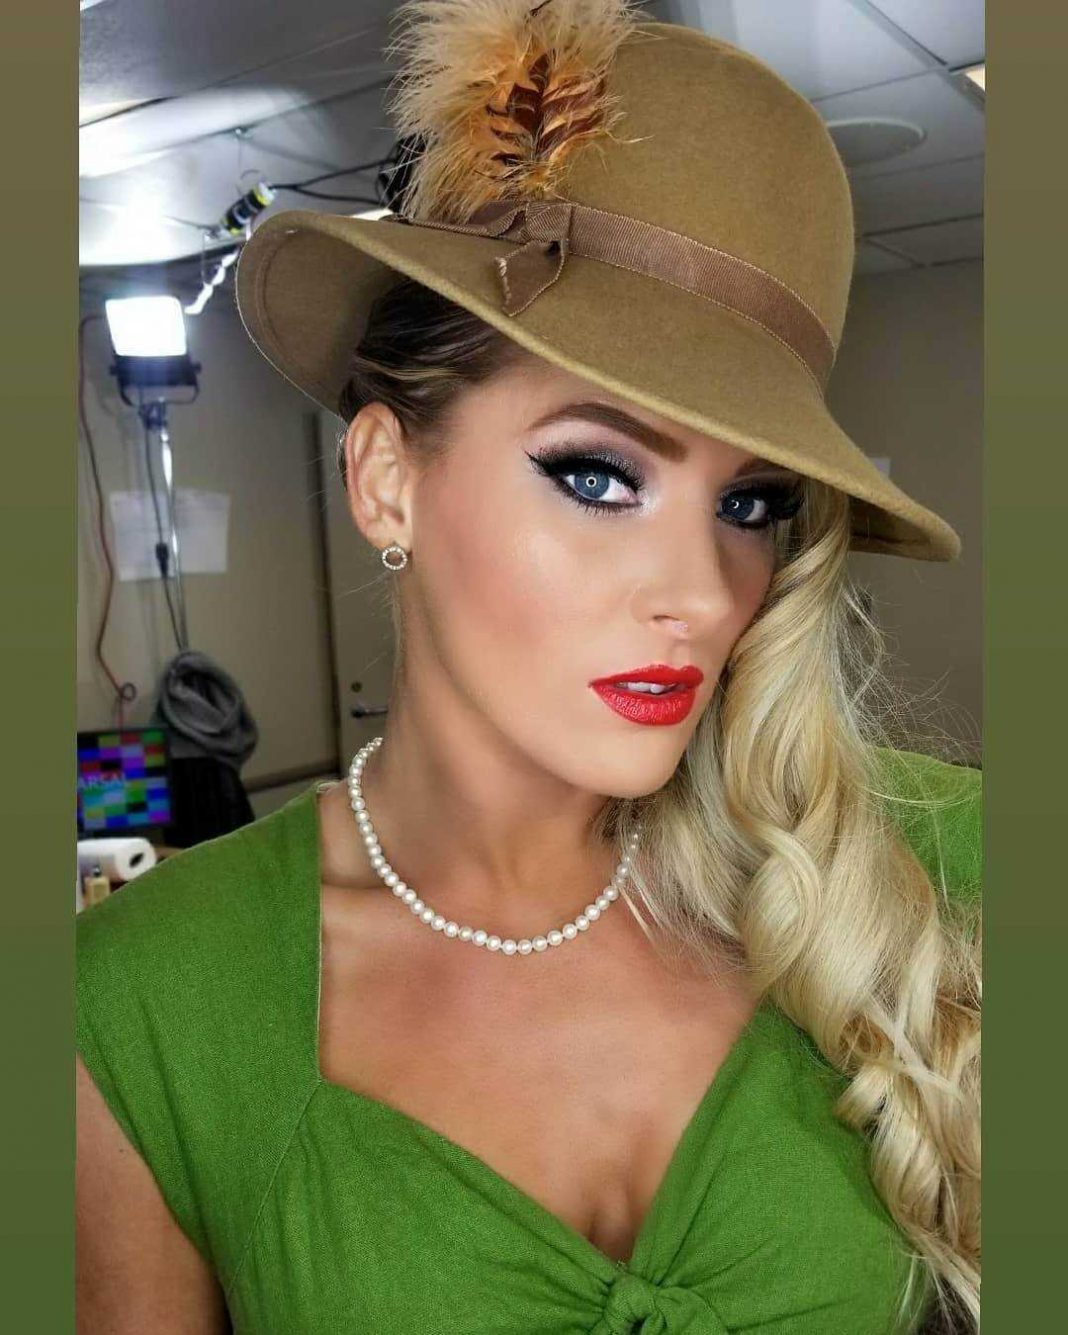 42 Lacey Evans Nude Pictures Present Her Polarizing Appeal 535